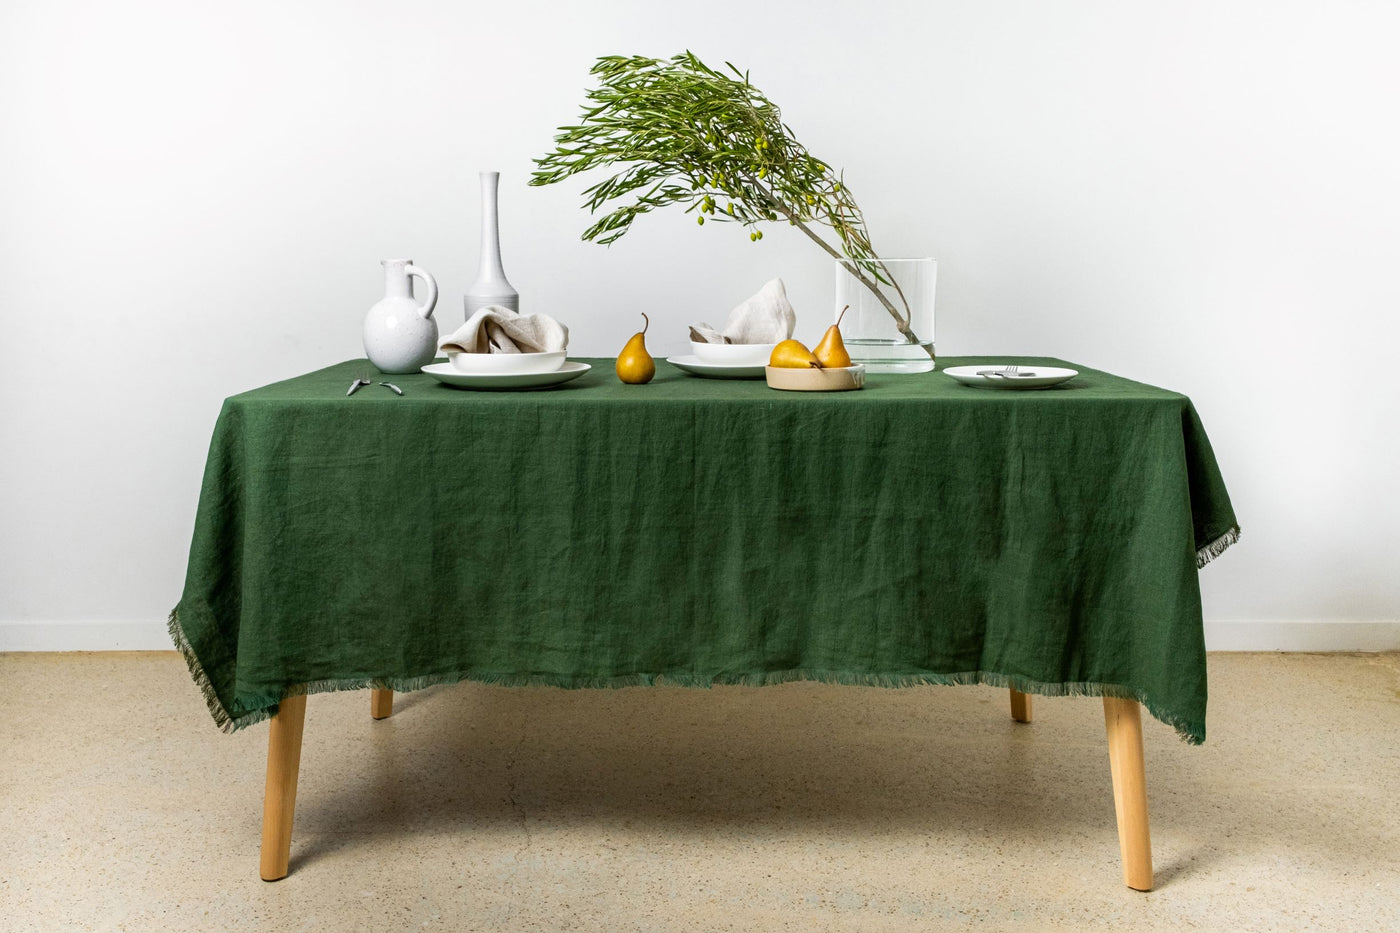 Moss Green linen tablecloth with frayed edges